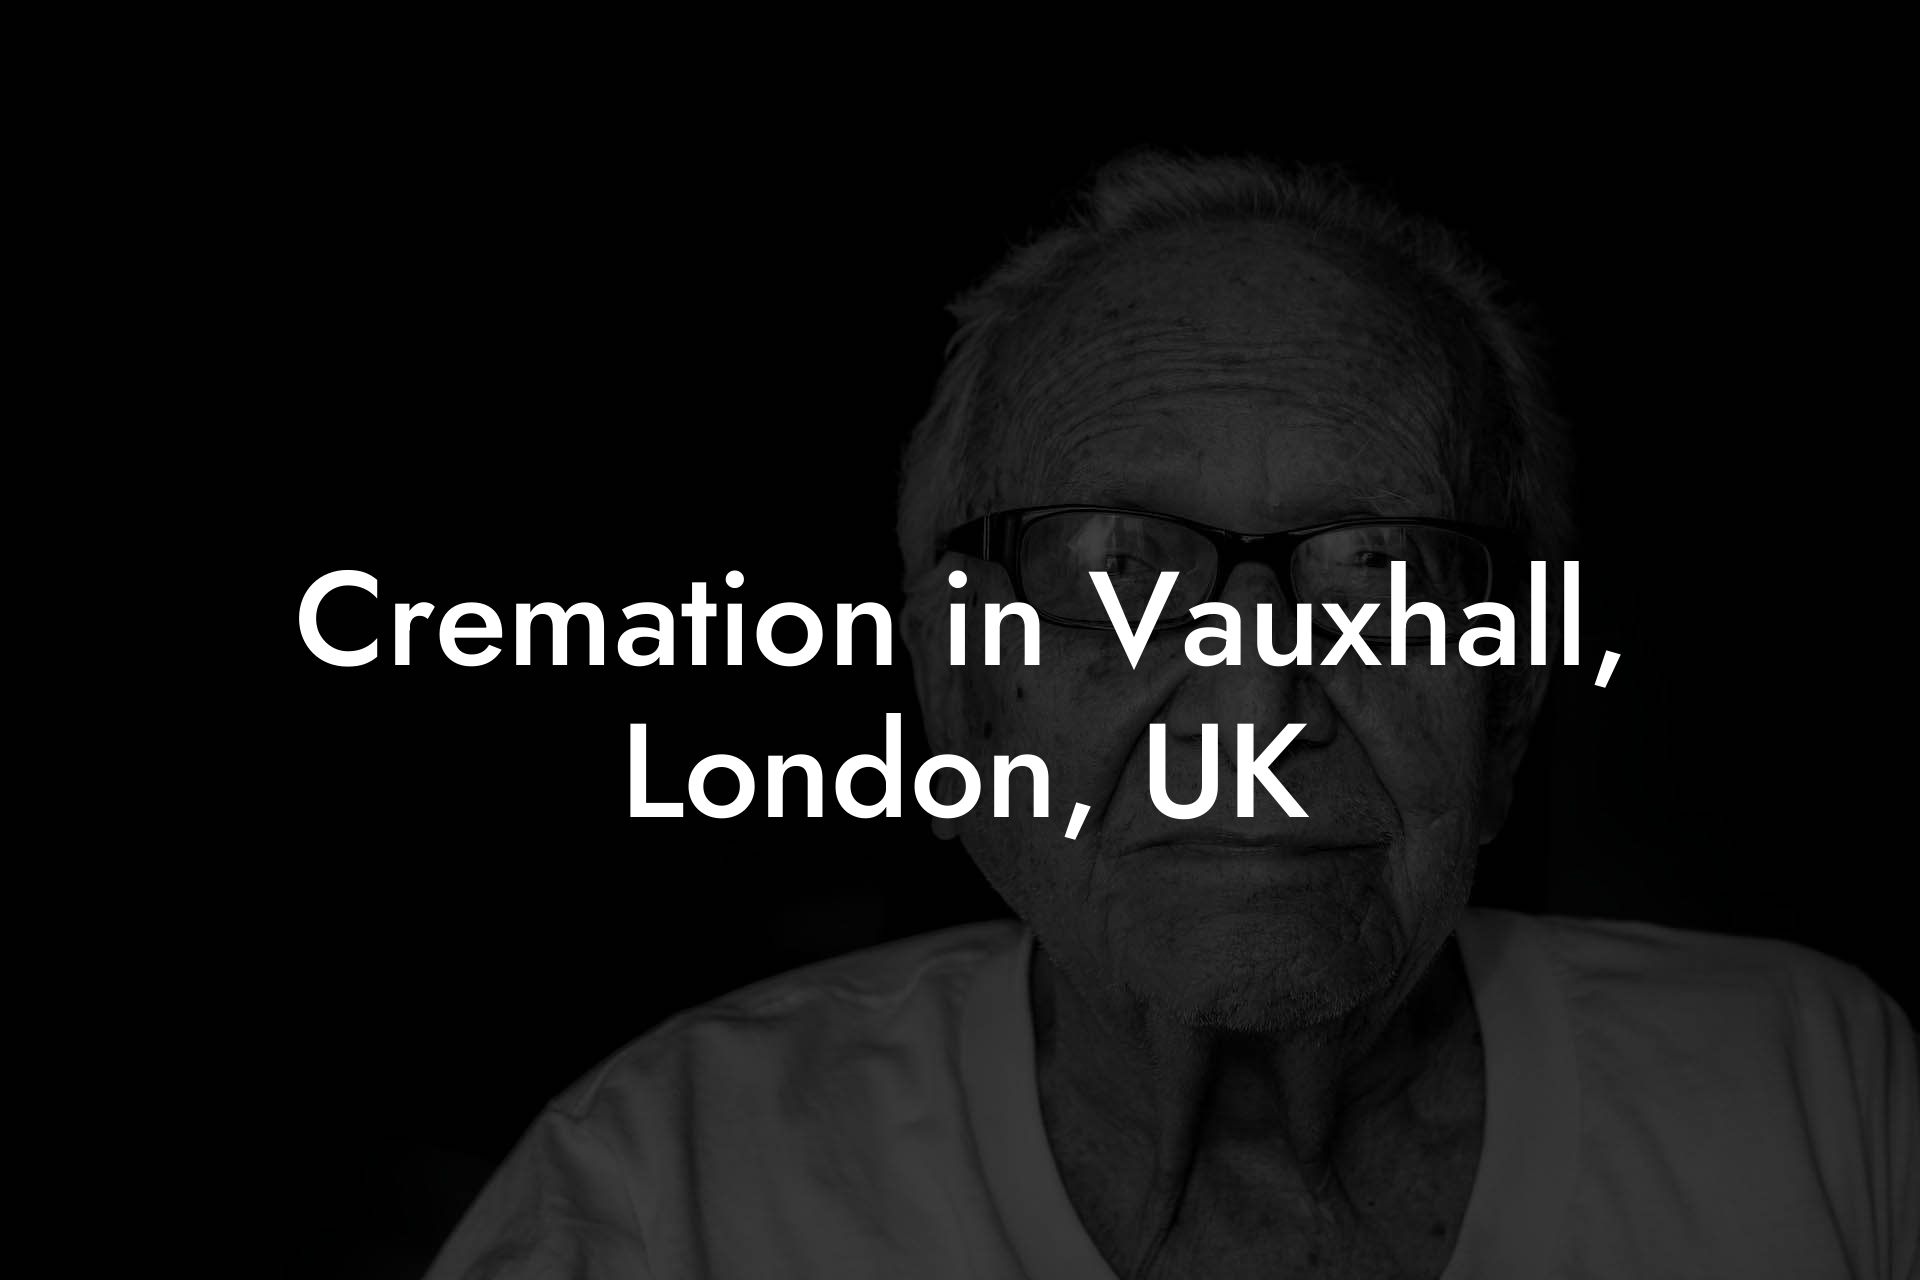 Cremation in Vauxhall, London, UK